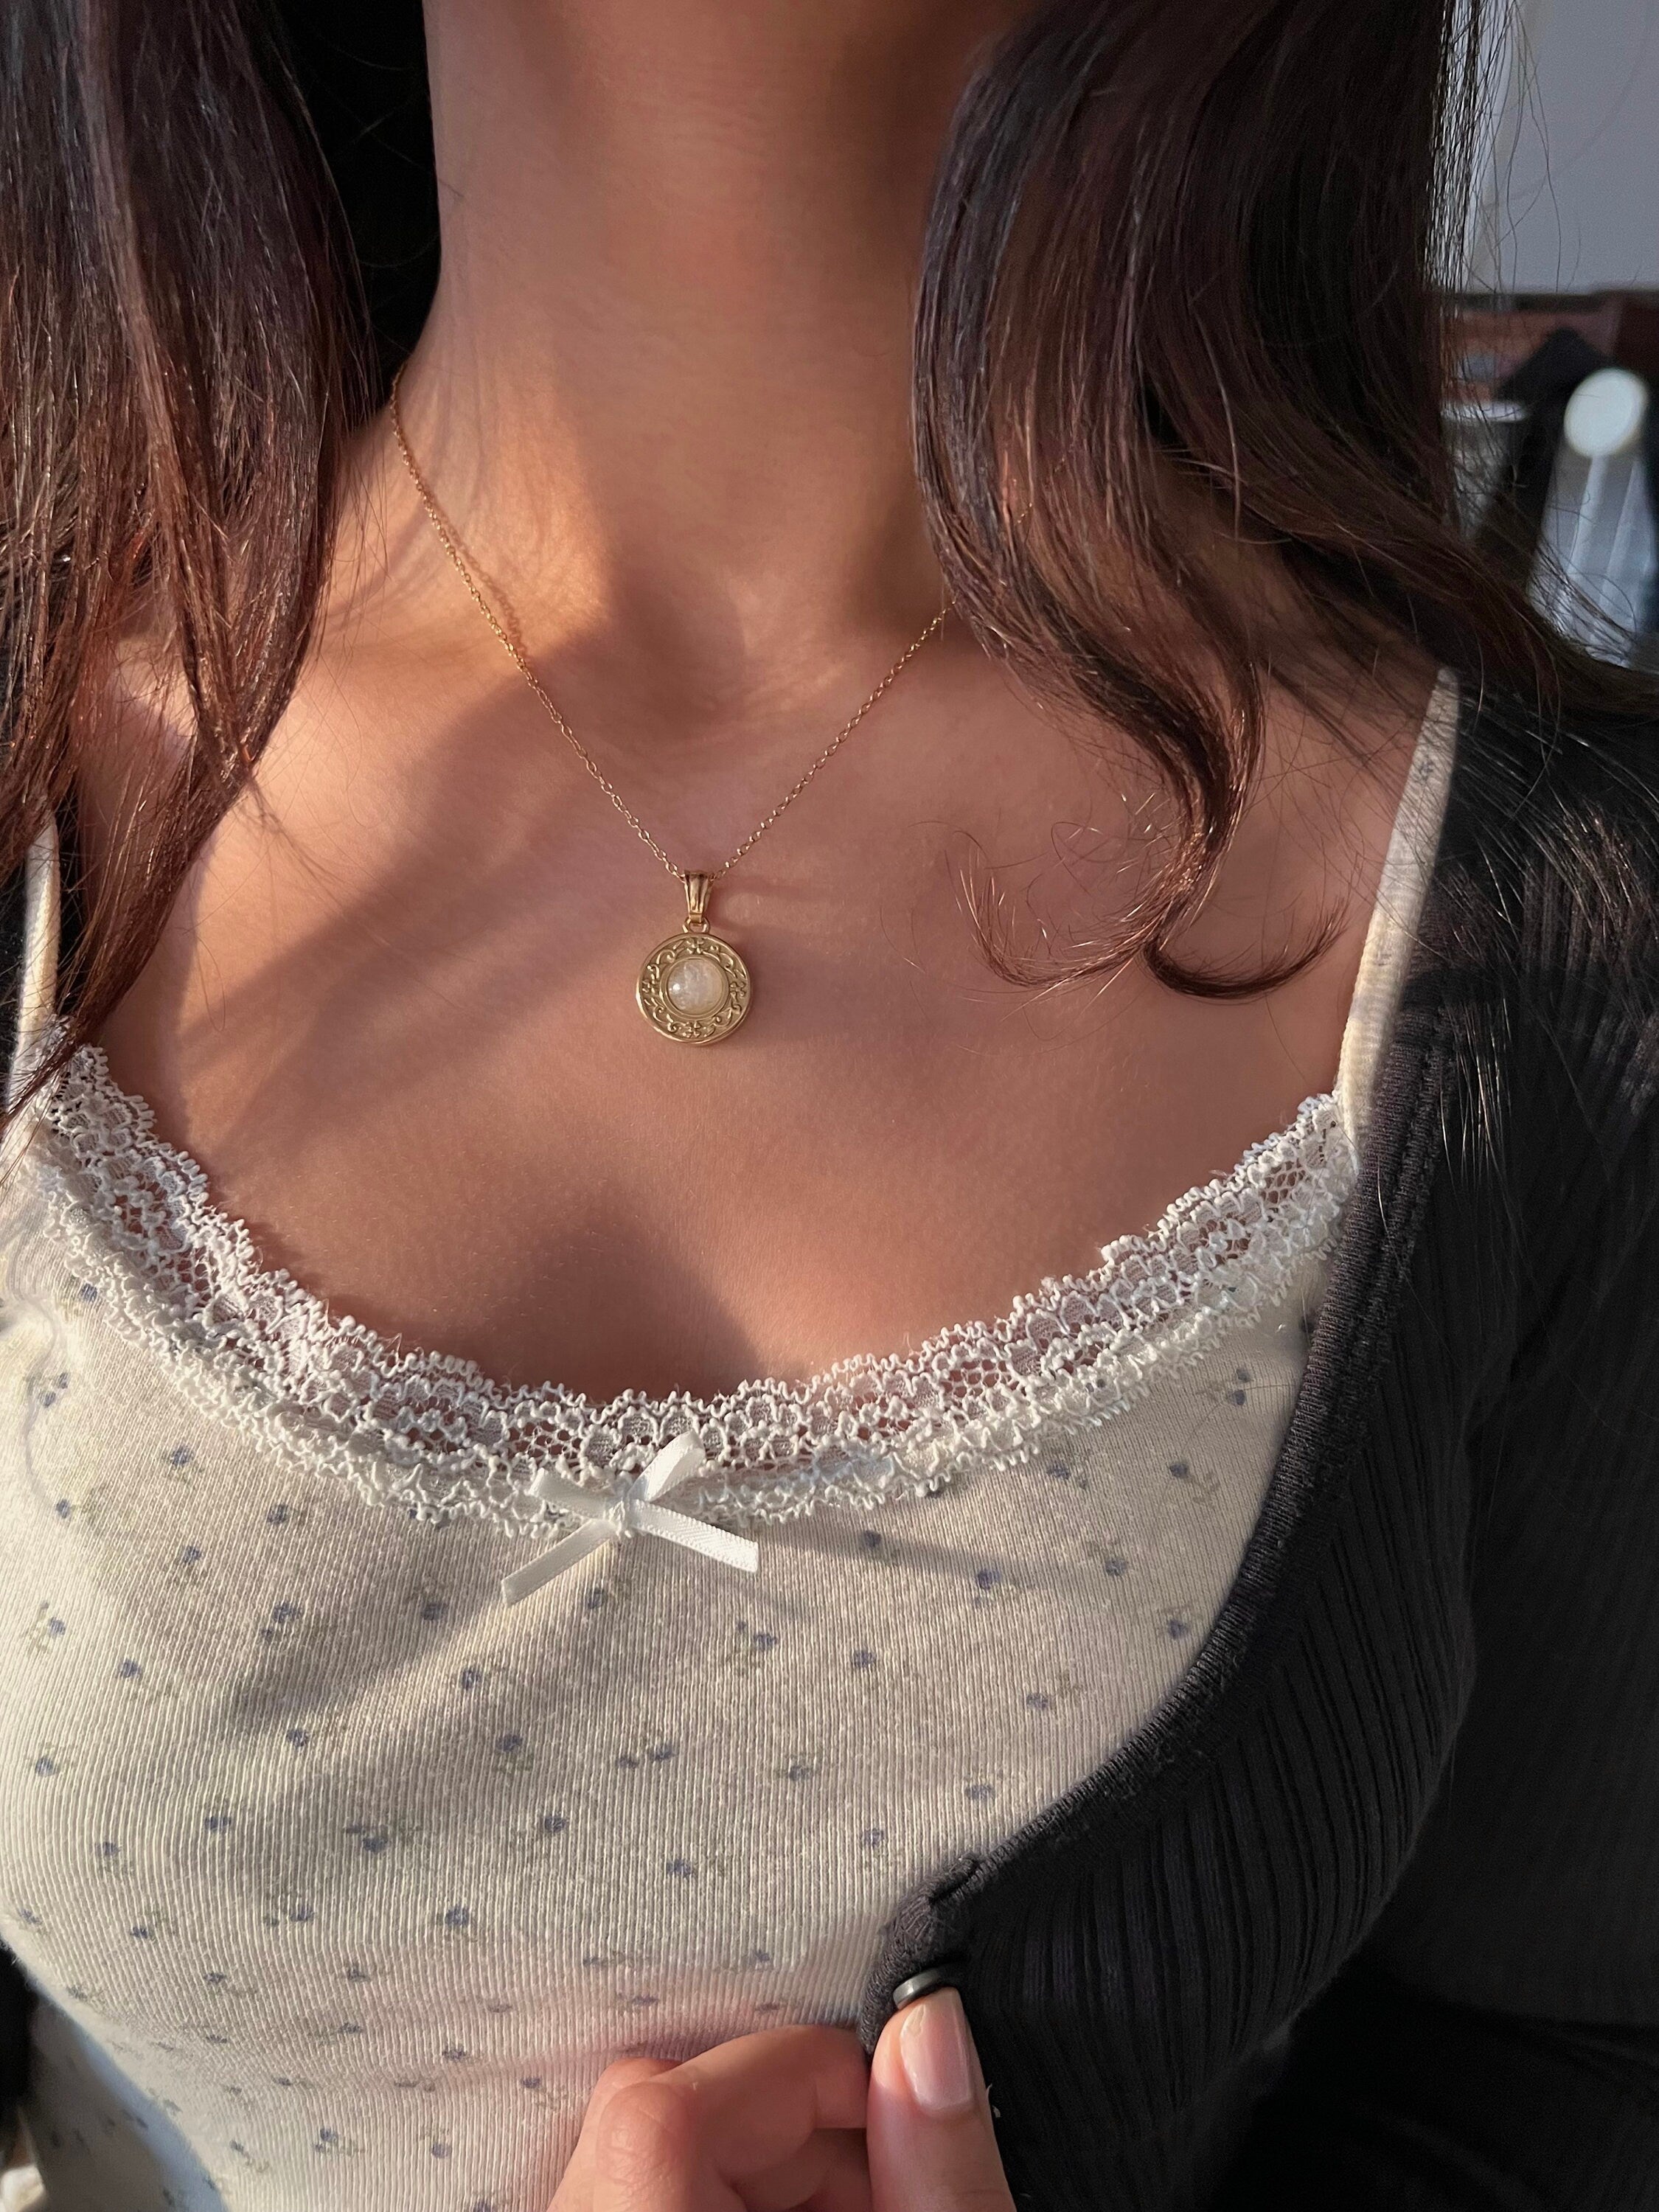 The Moon Necklace